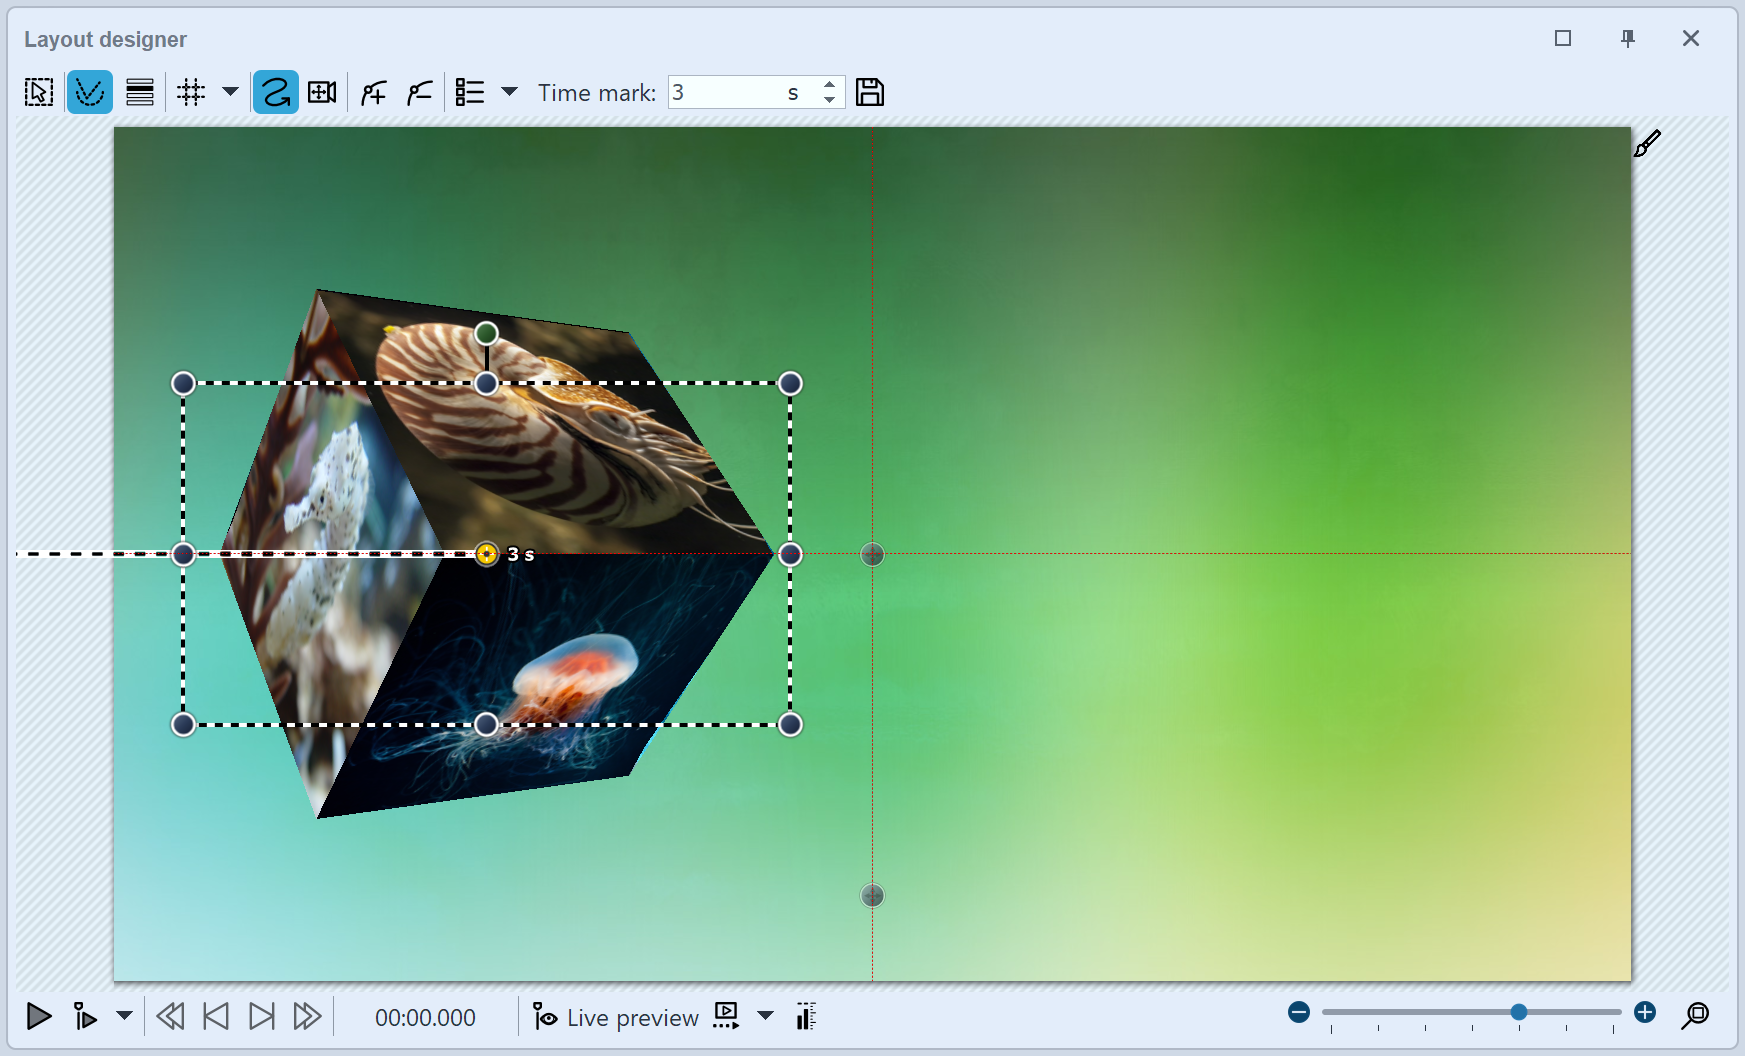 Effect 3D cube in layout designer